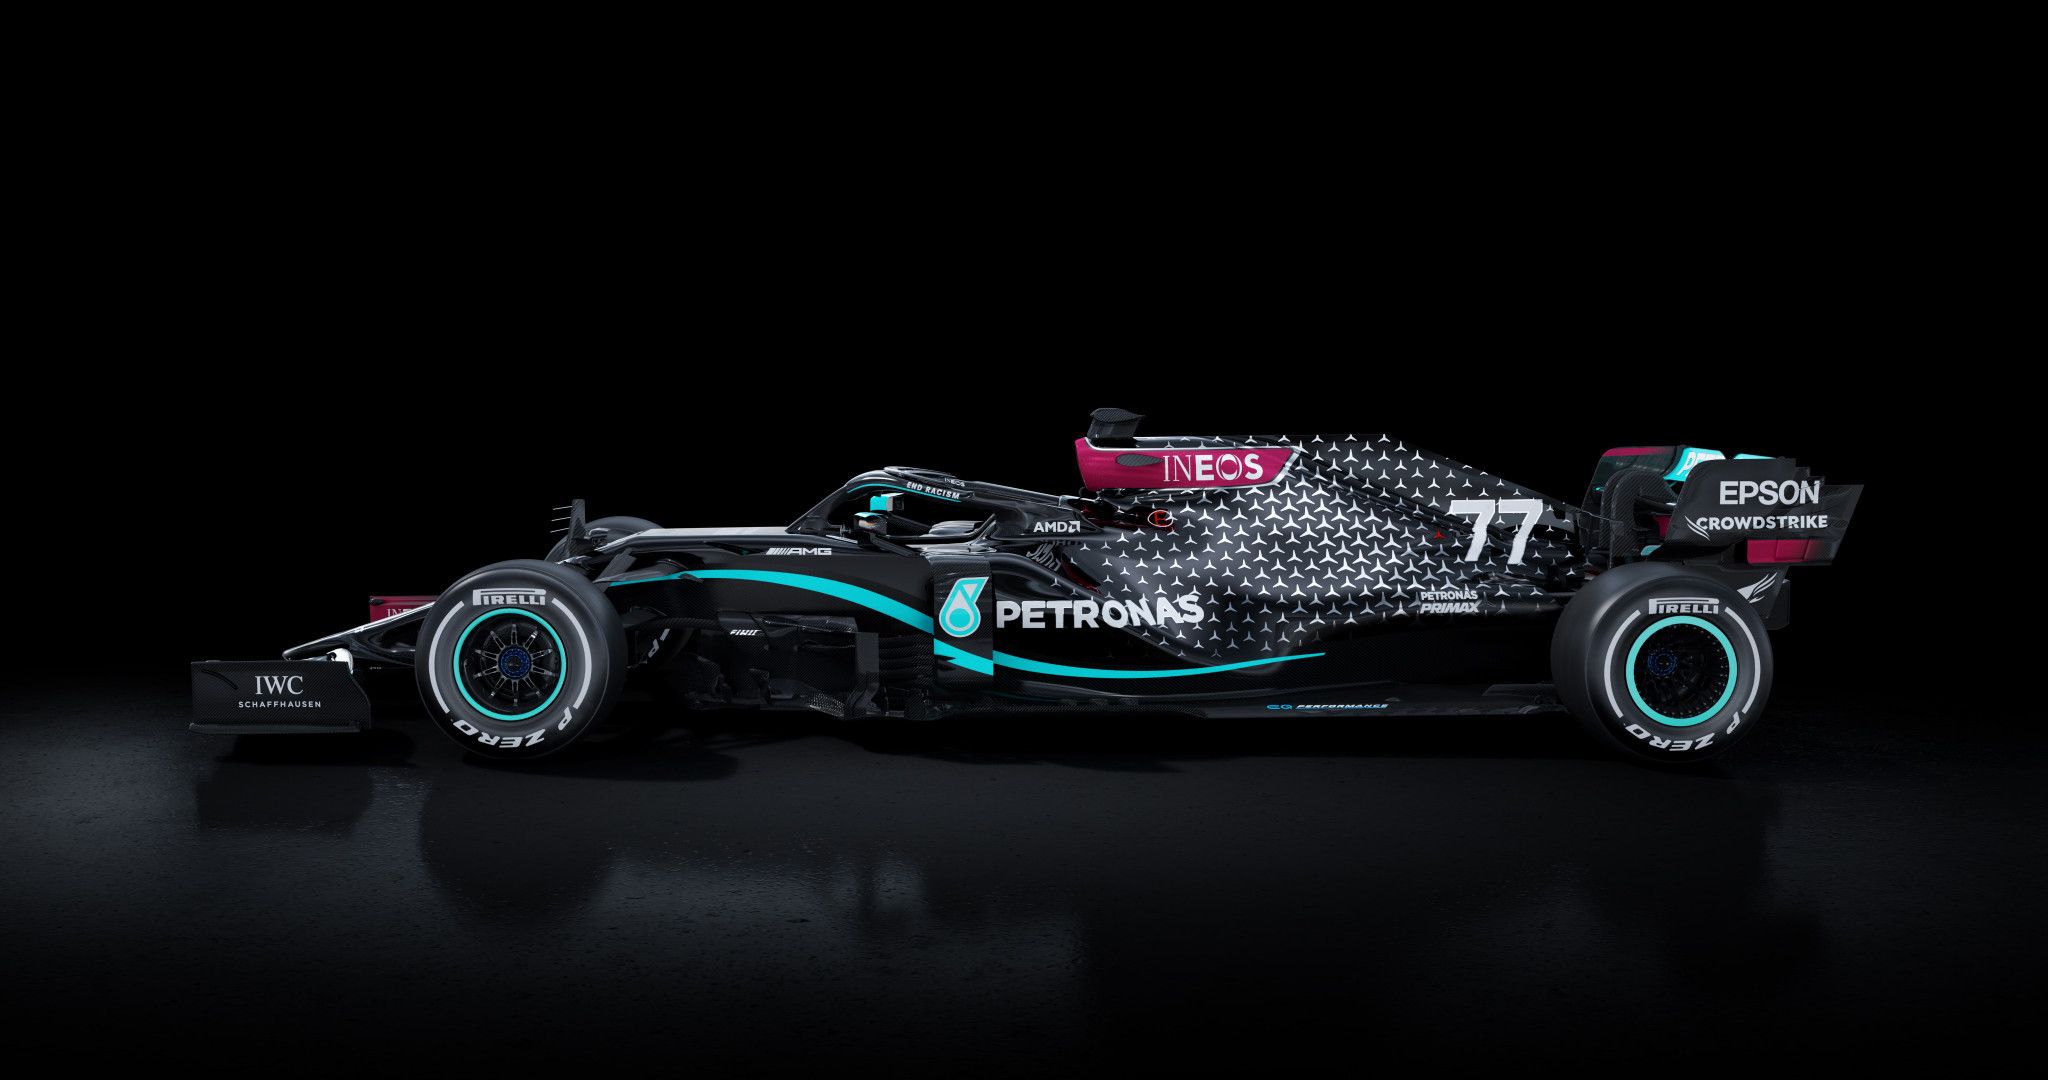 Mercedes AMG F1 will be running a black paint scheme for 2020 to signal their commitment to diversity.